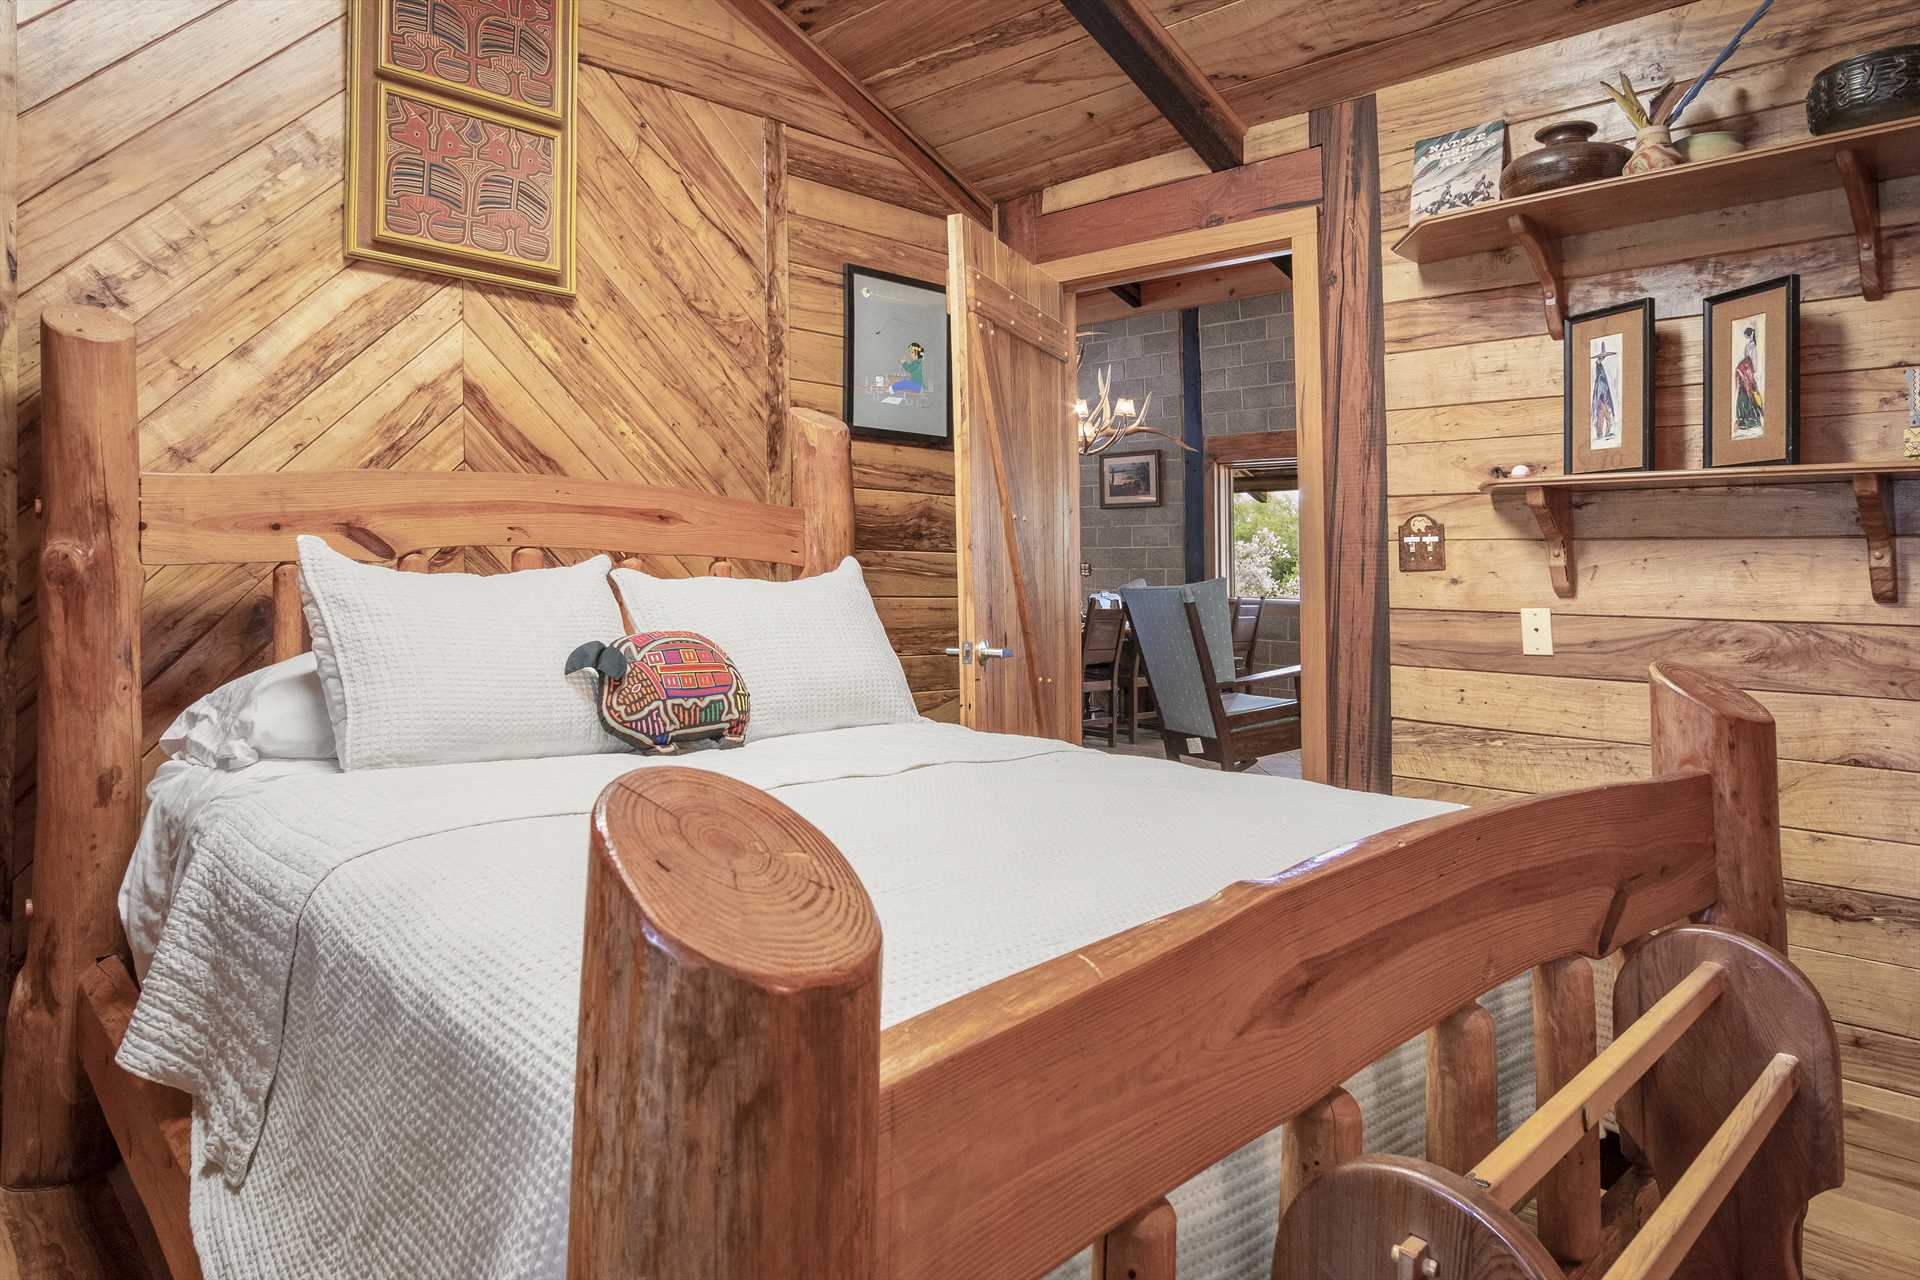                                                 Along with the bedrooms here, there are optional trundle beds and queen-sized chair/bed combos that provide restful sleeping accommodations for up to 12 people total.